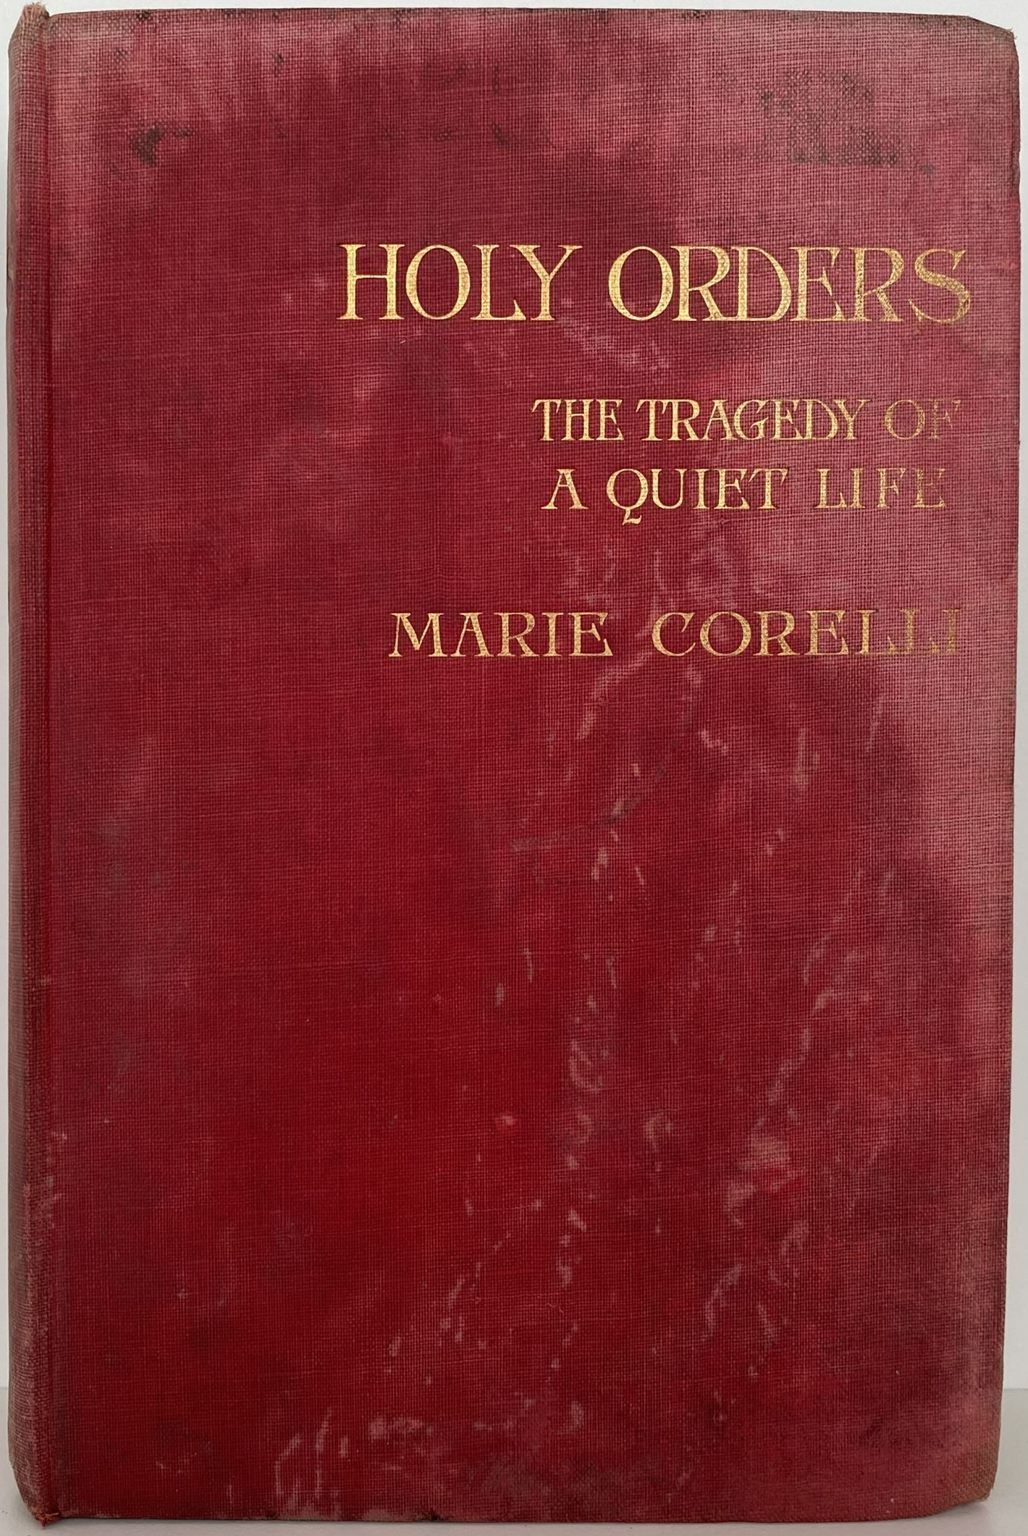 HOLY ORDERS: The Tragedy of a Quiet Life